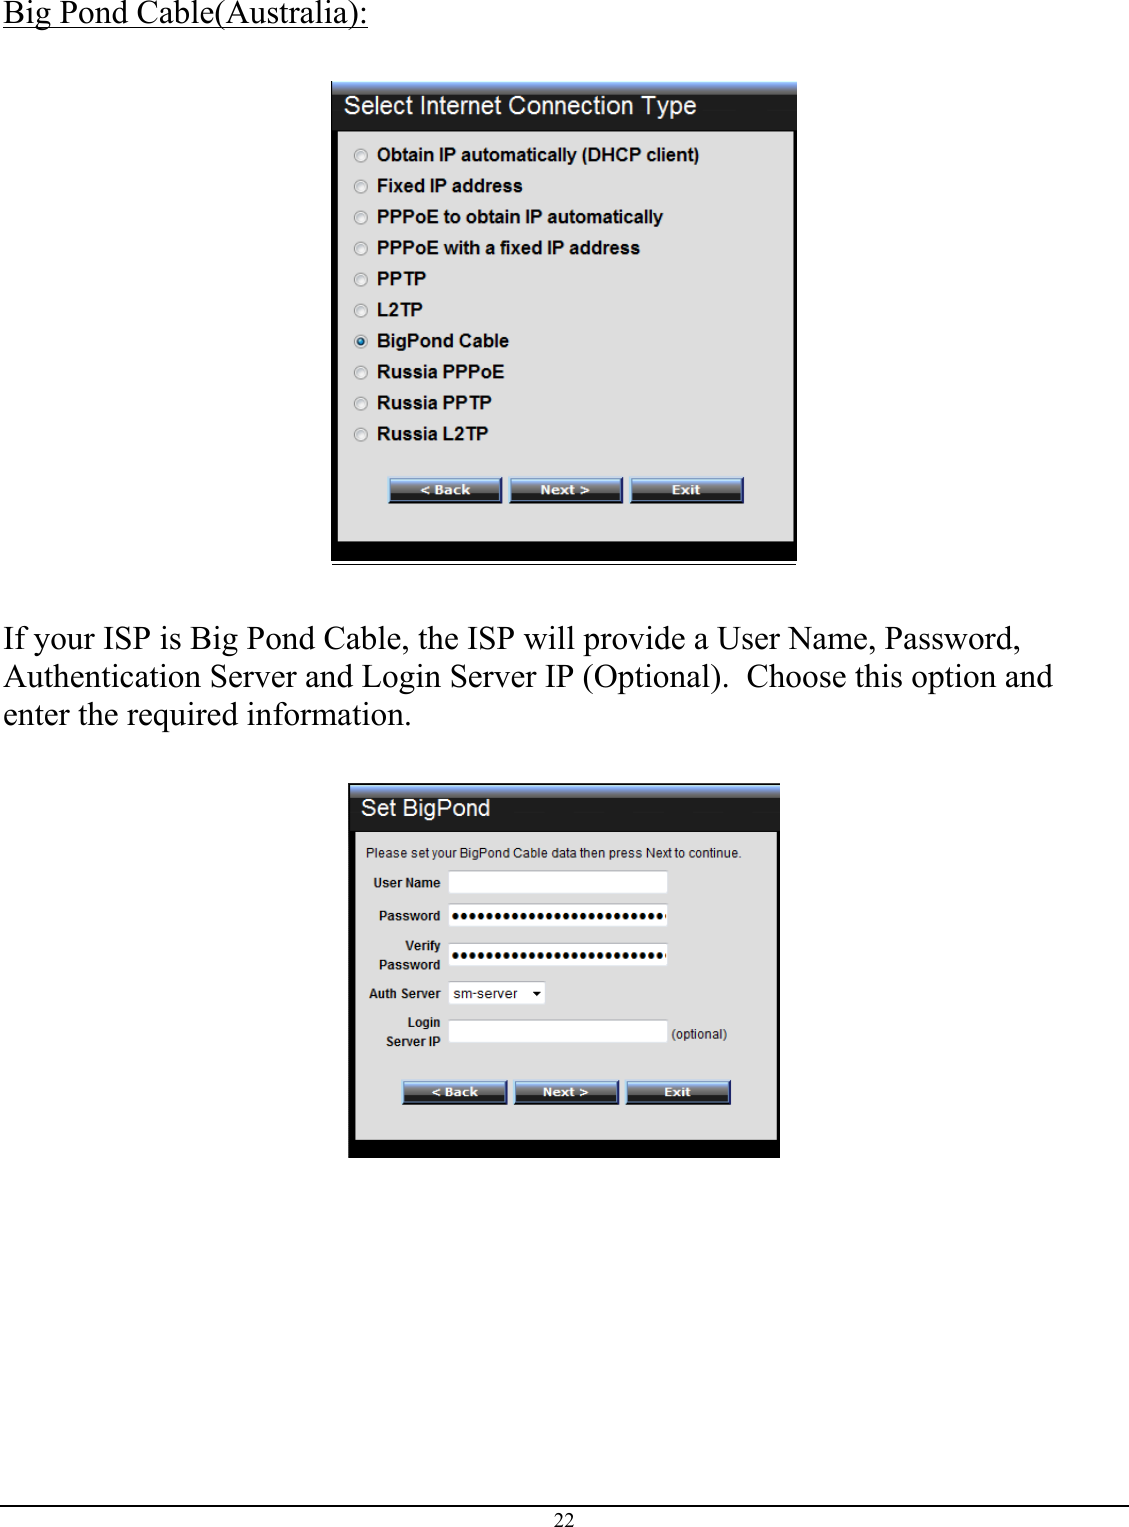 22  Big Pond Cable(Australia):    If your ISP is Big Pond Cable, the ISP will provide a User Name, Password, Authentication Server and Login Server IP (Optional).  Choose this option and enter the required information.          